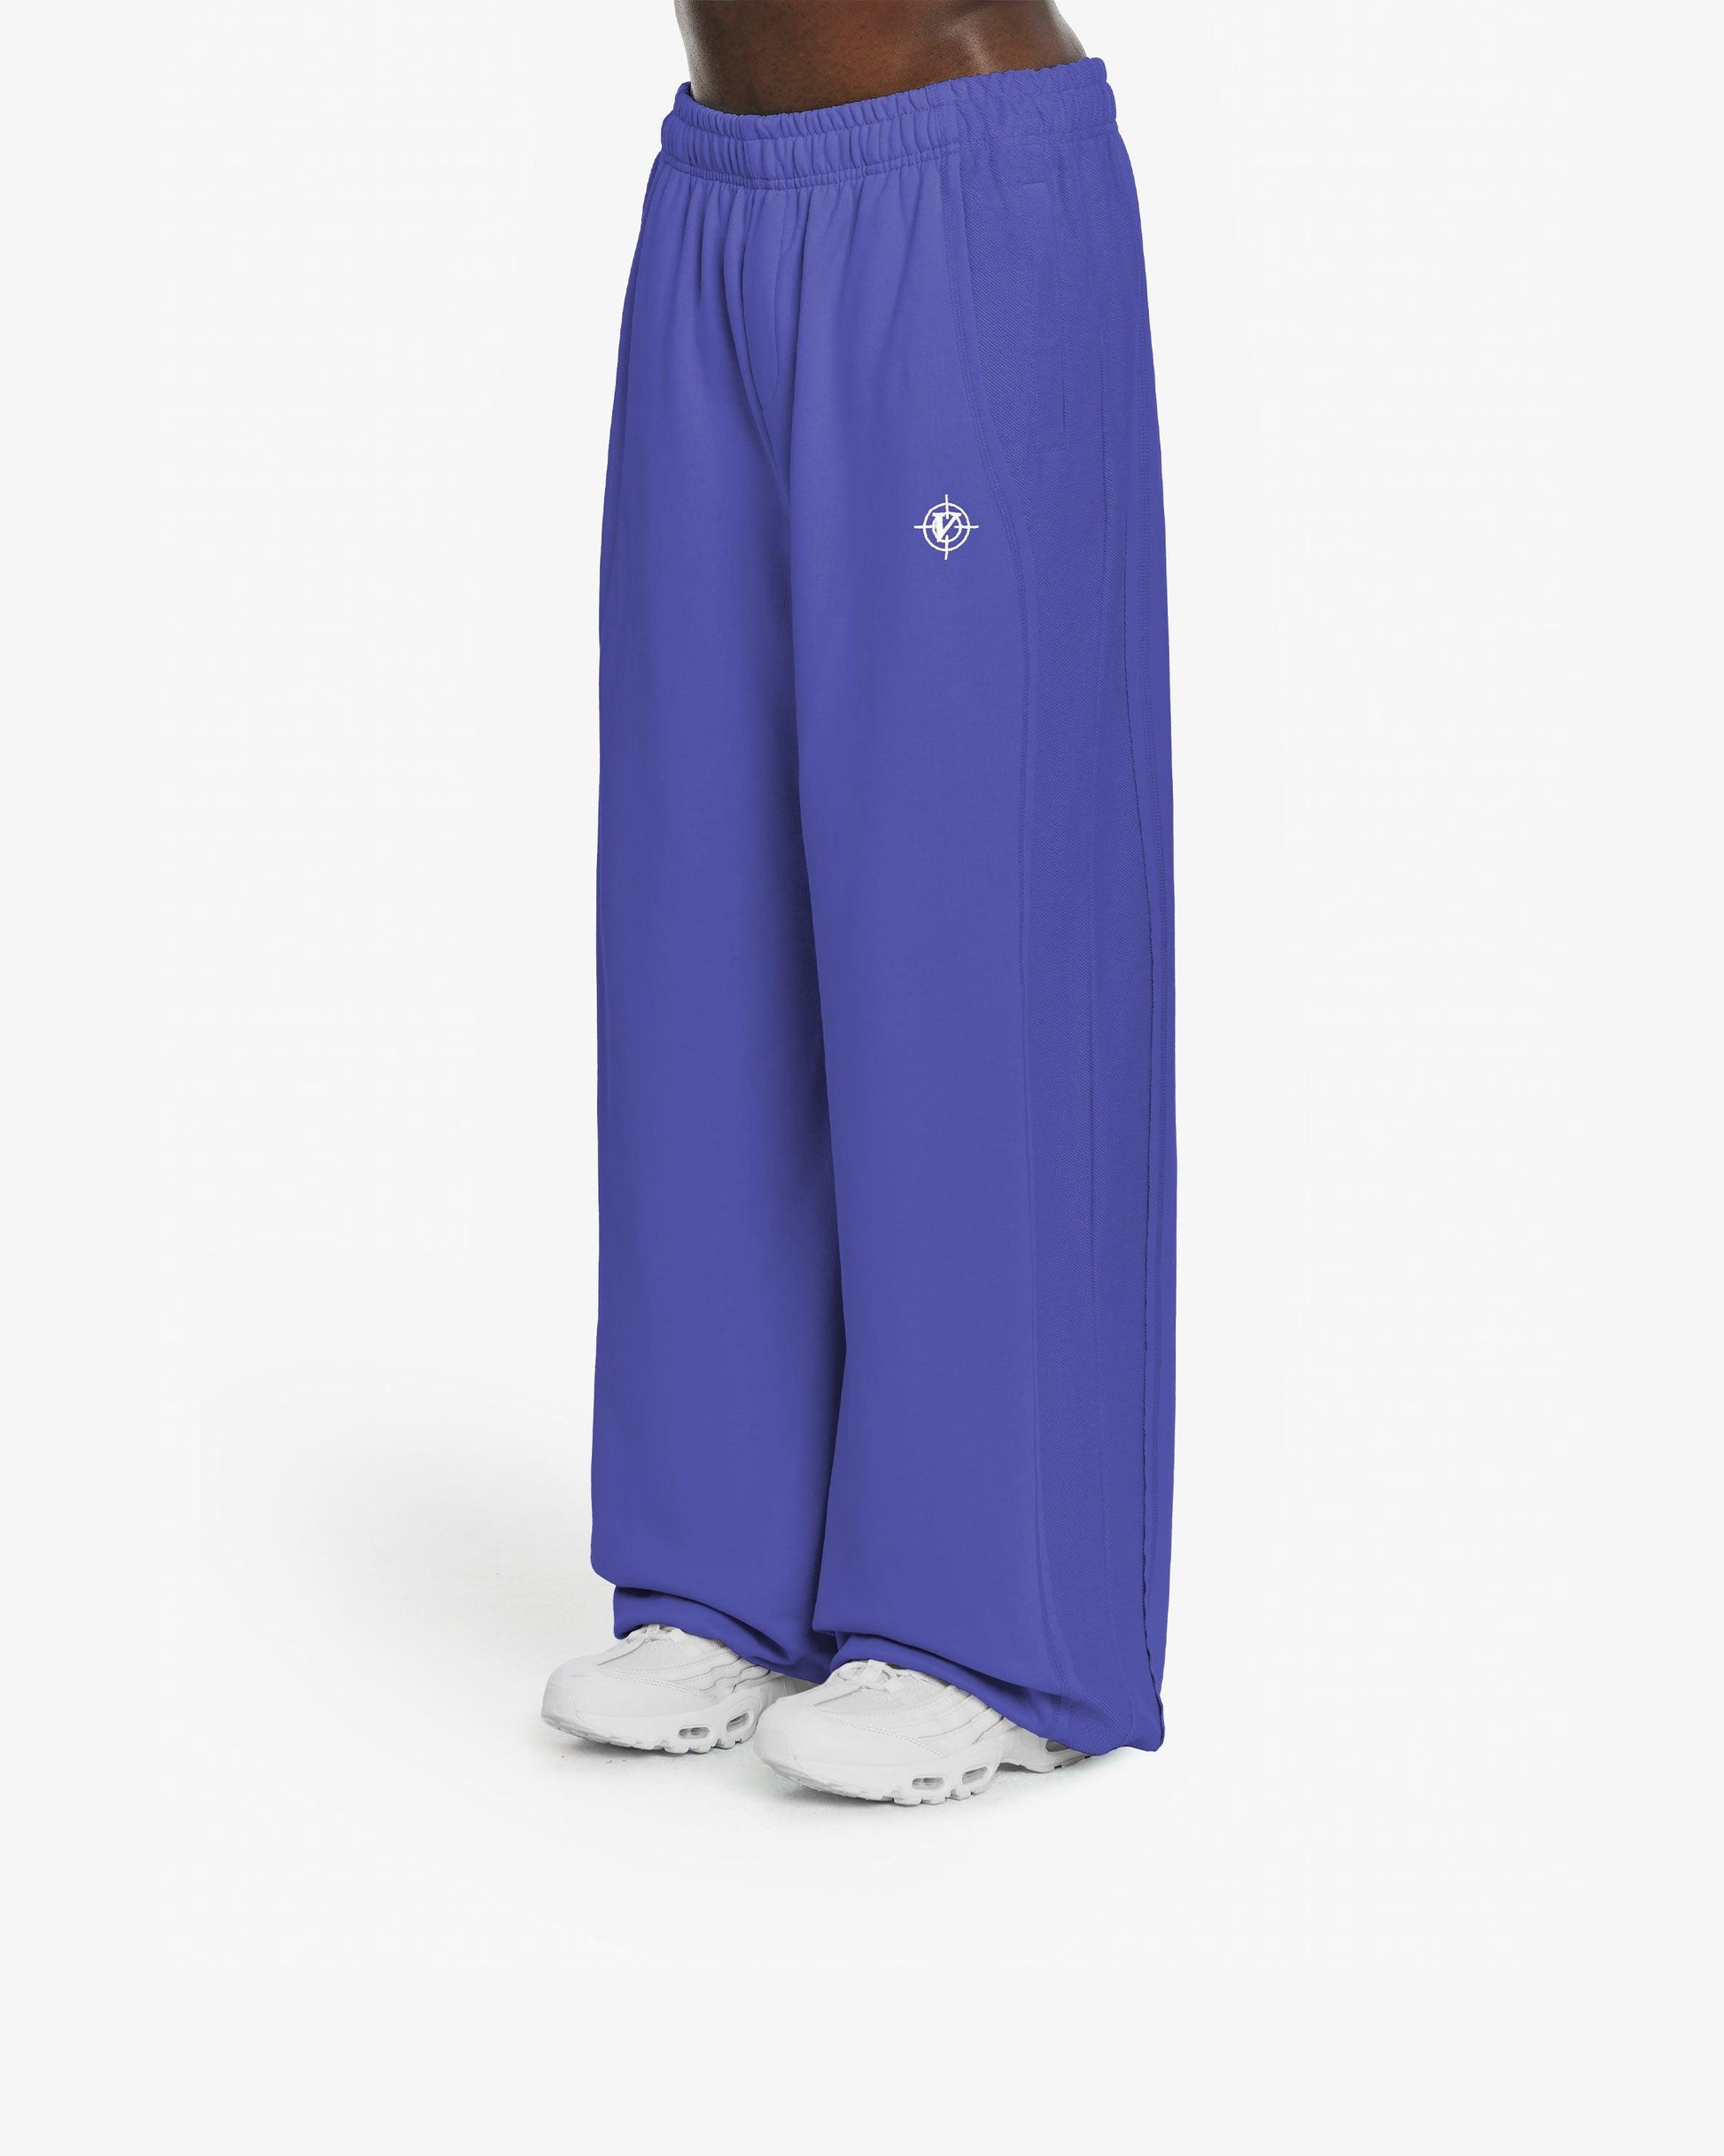 INSIDE OUT JOGGER OCEAN BLUE - VICINITY